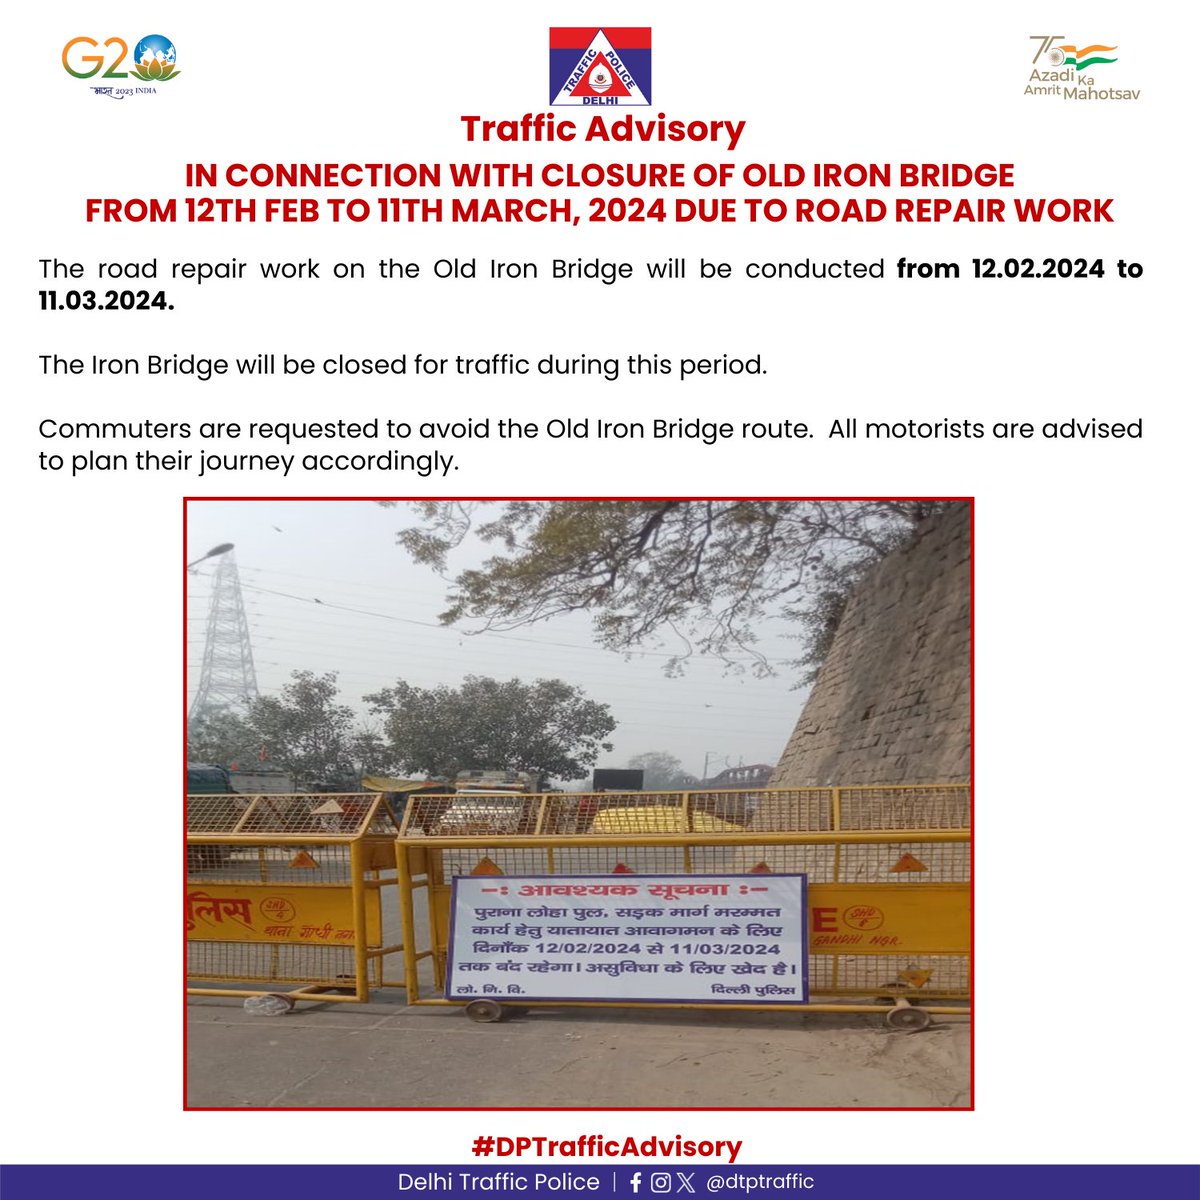 Traffic Advisory

The Old Iron Bridge will remain closed from 12.02.2024 to 11.03.2024 due to road repair work. 

#DPTrafficAdvisory